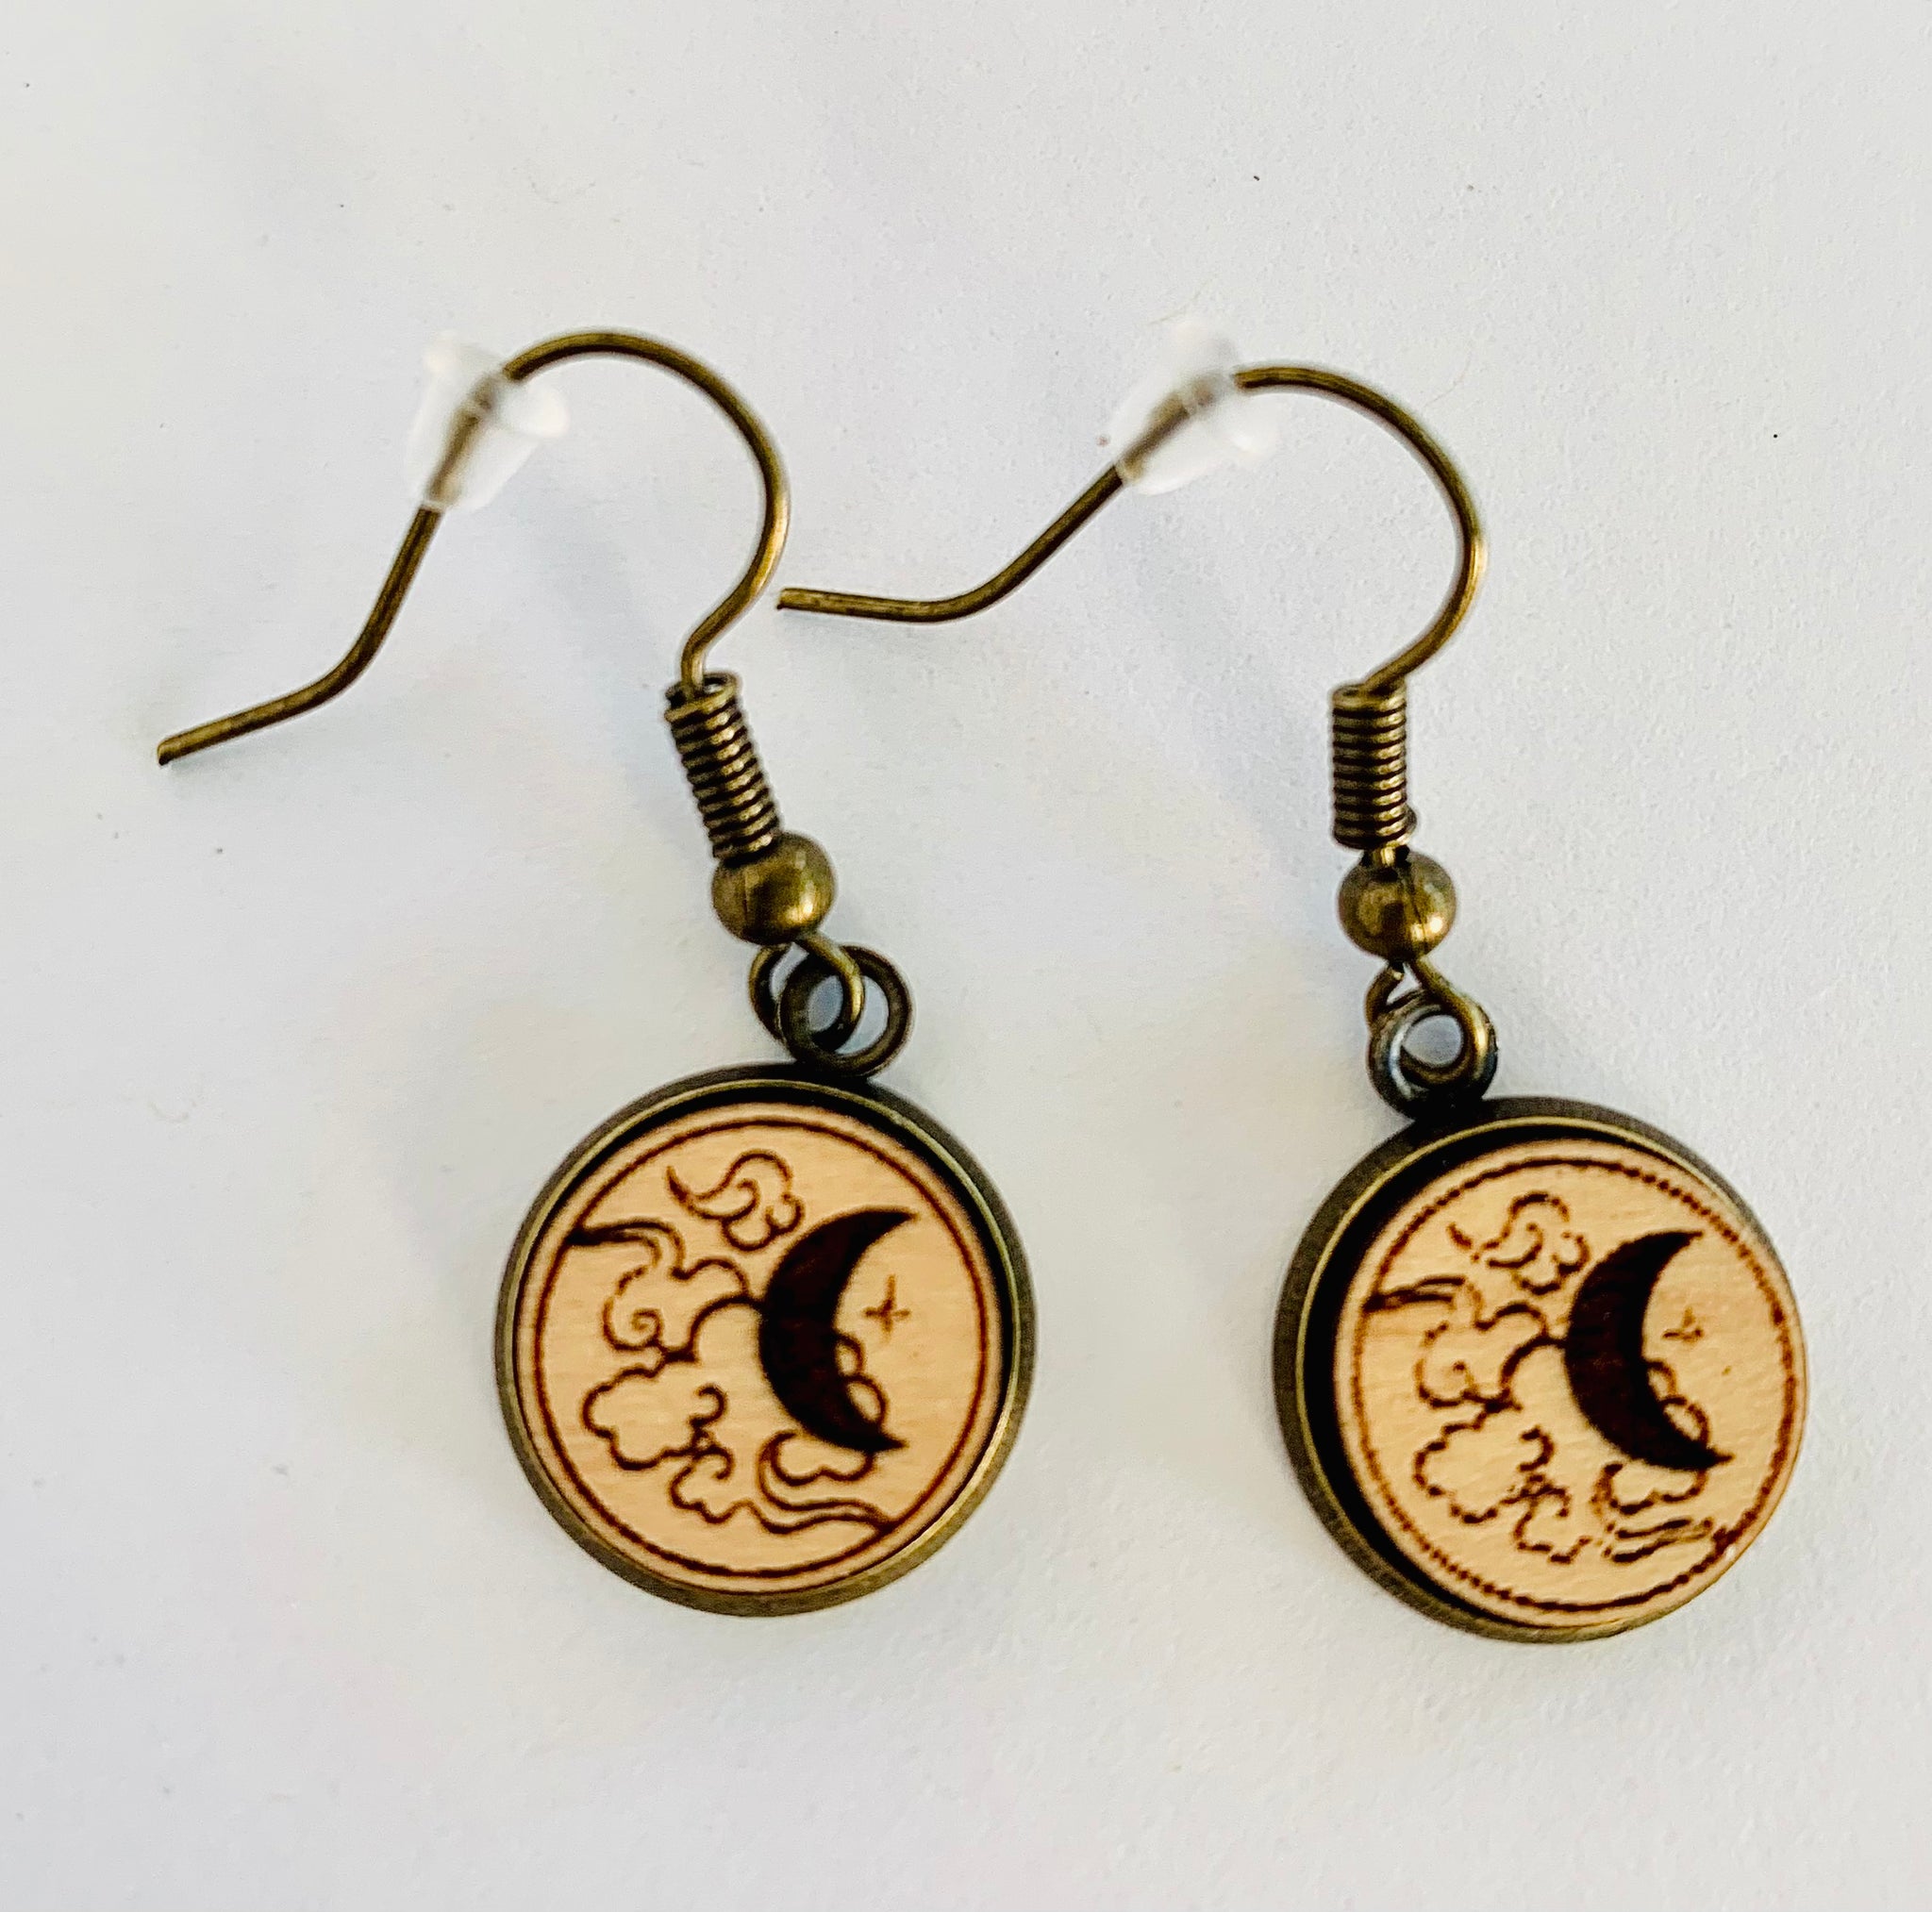 Upcycled Earrings Goodnight Moon